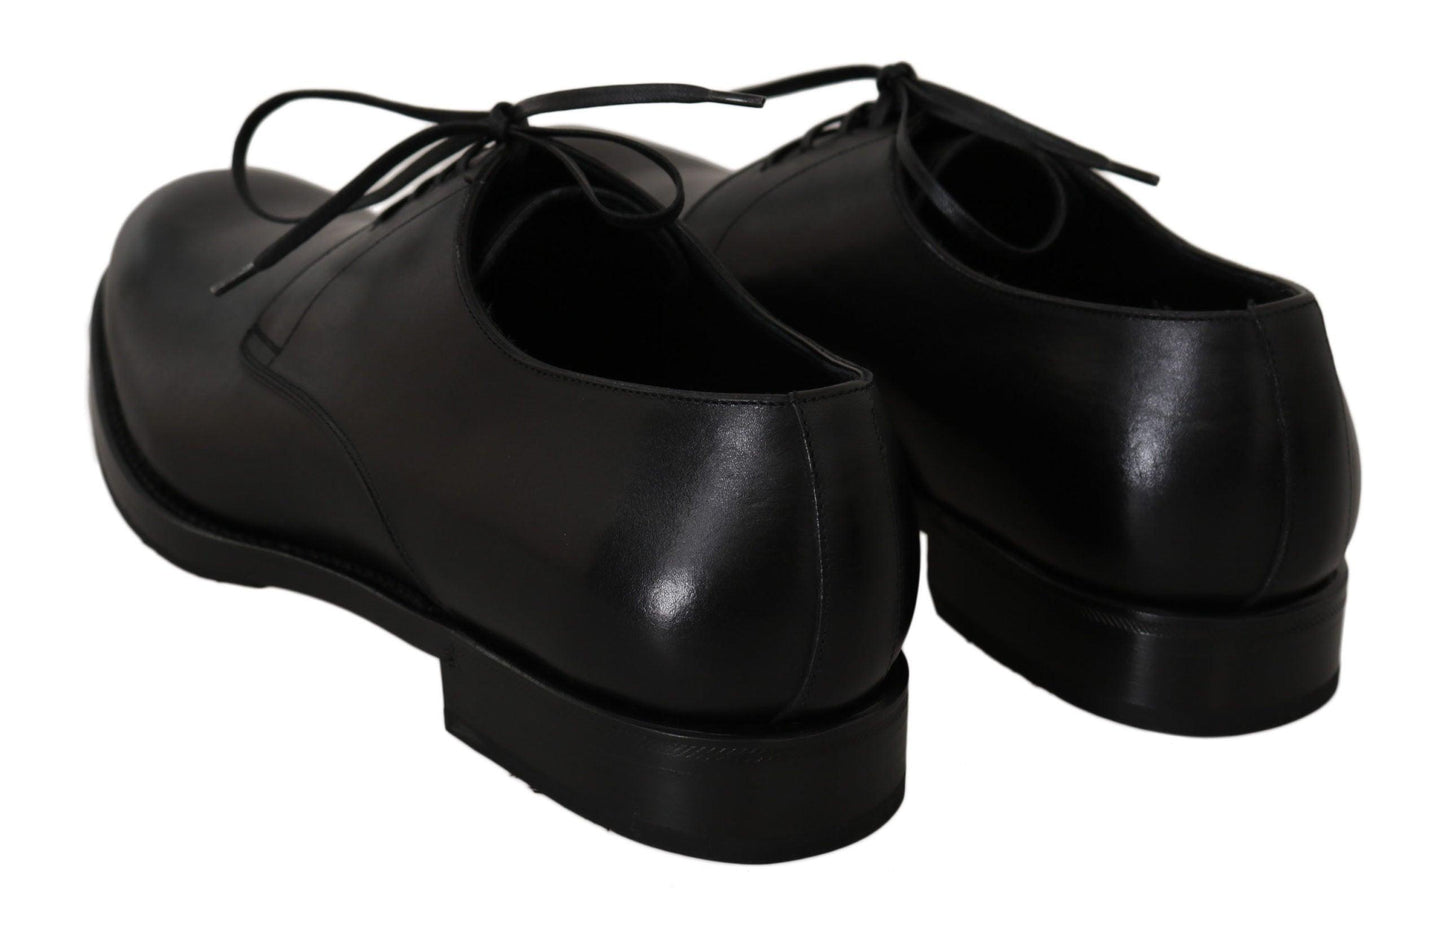 Dolce & Gabbana Black Leather Derby Formal Dress Shoes - Designed by Dolce & Gabbana Available to Buy at a Discounted Price on Moon Behind The Hill Online Designer Discount Store